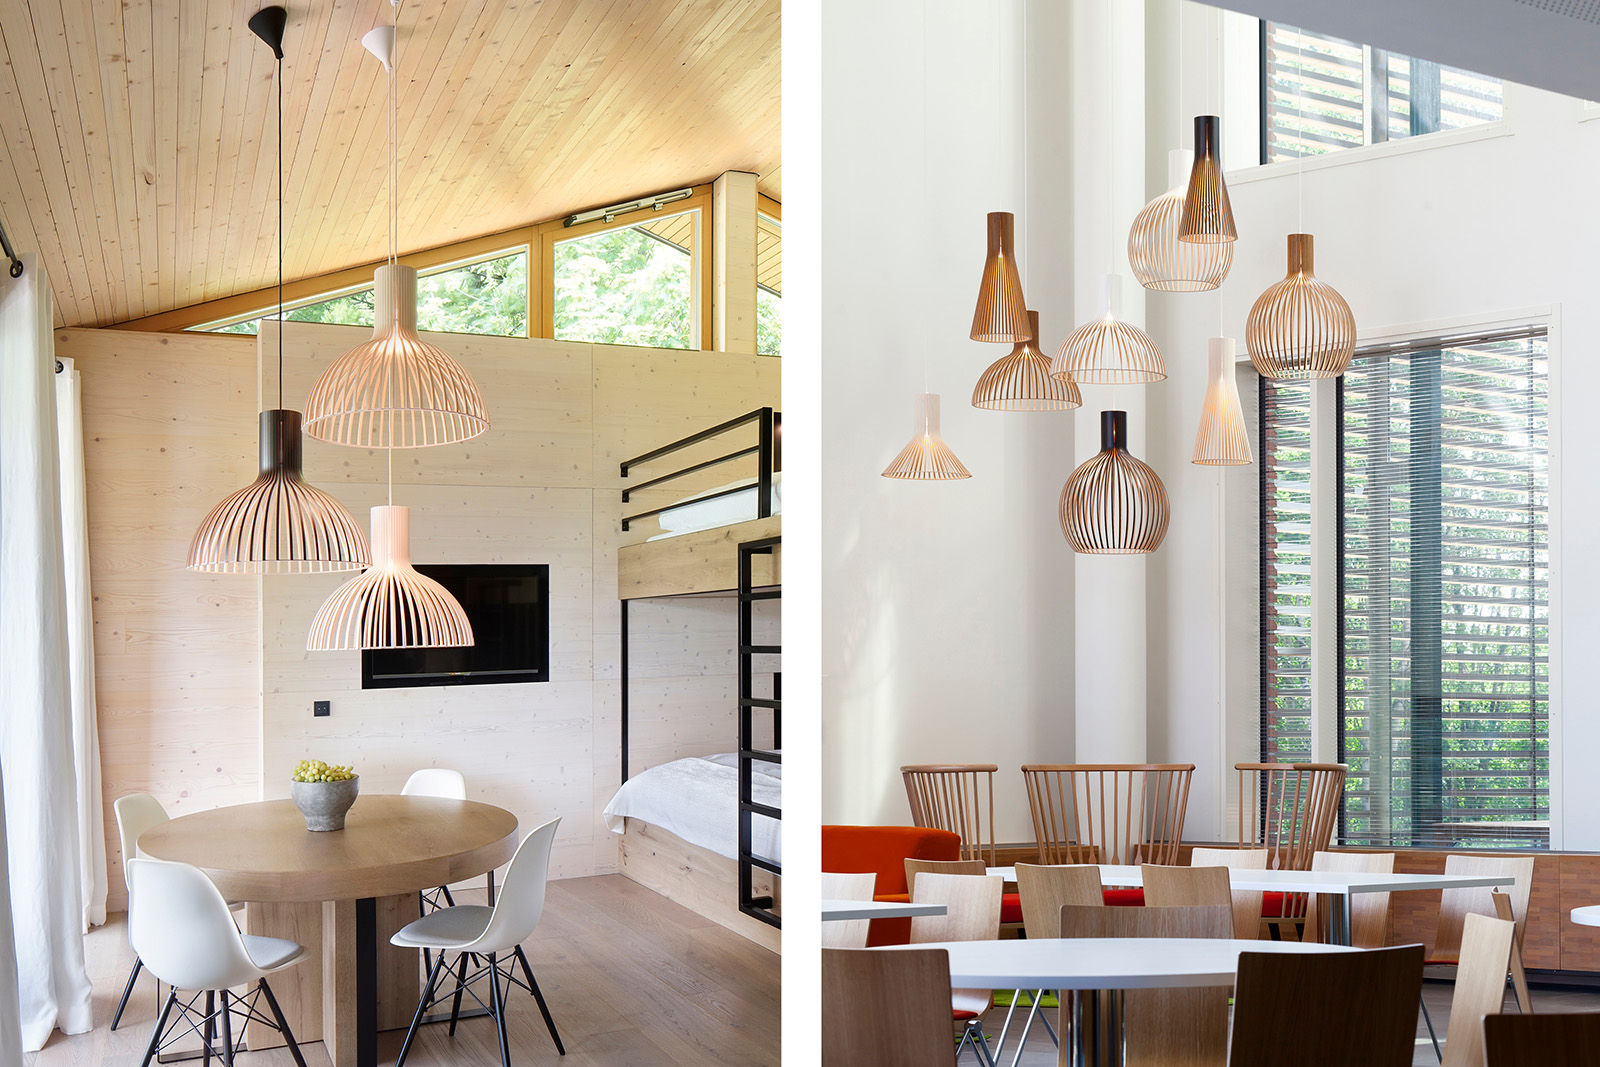 Lamp groups above tables in spacious interiors.